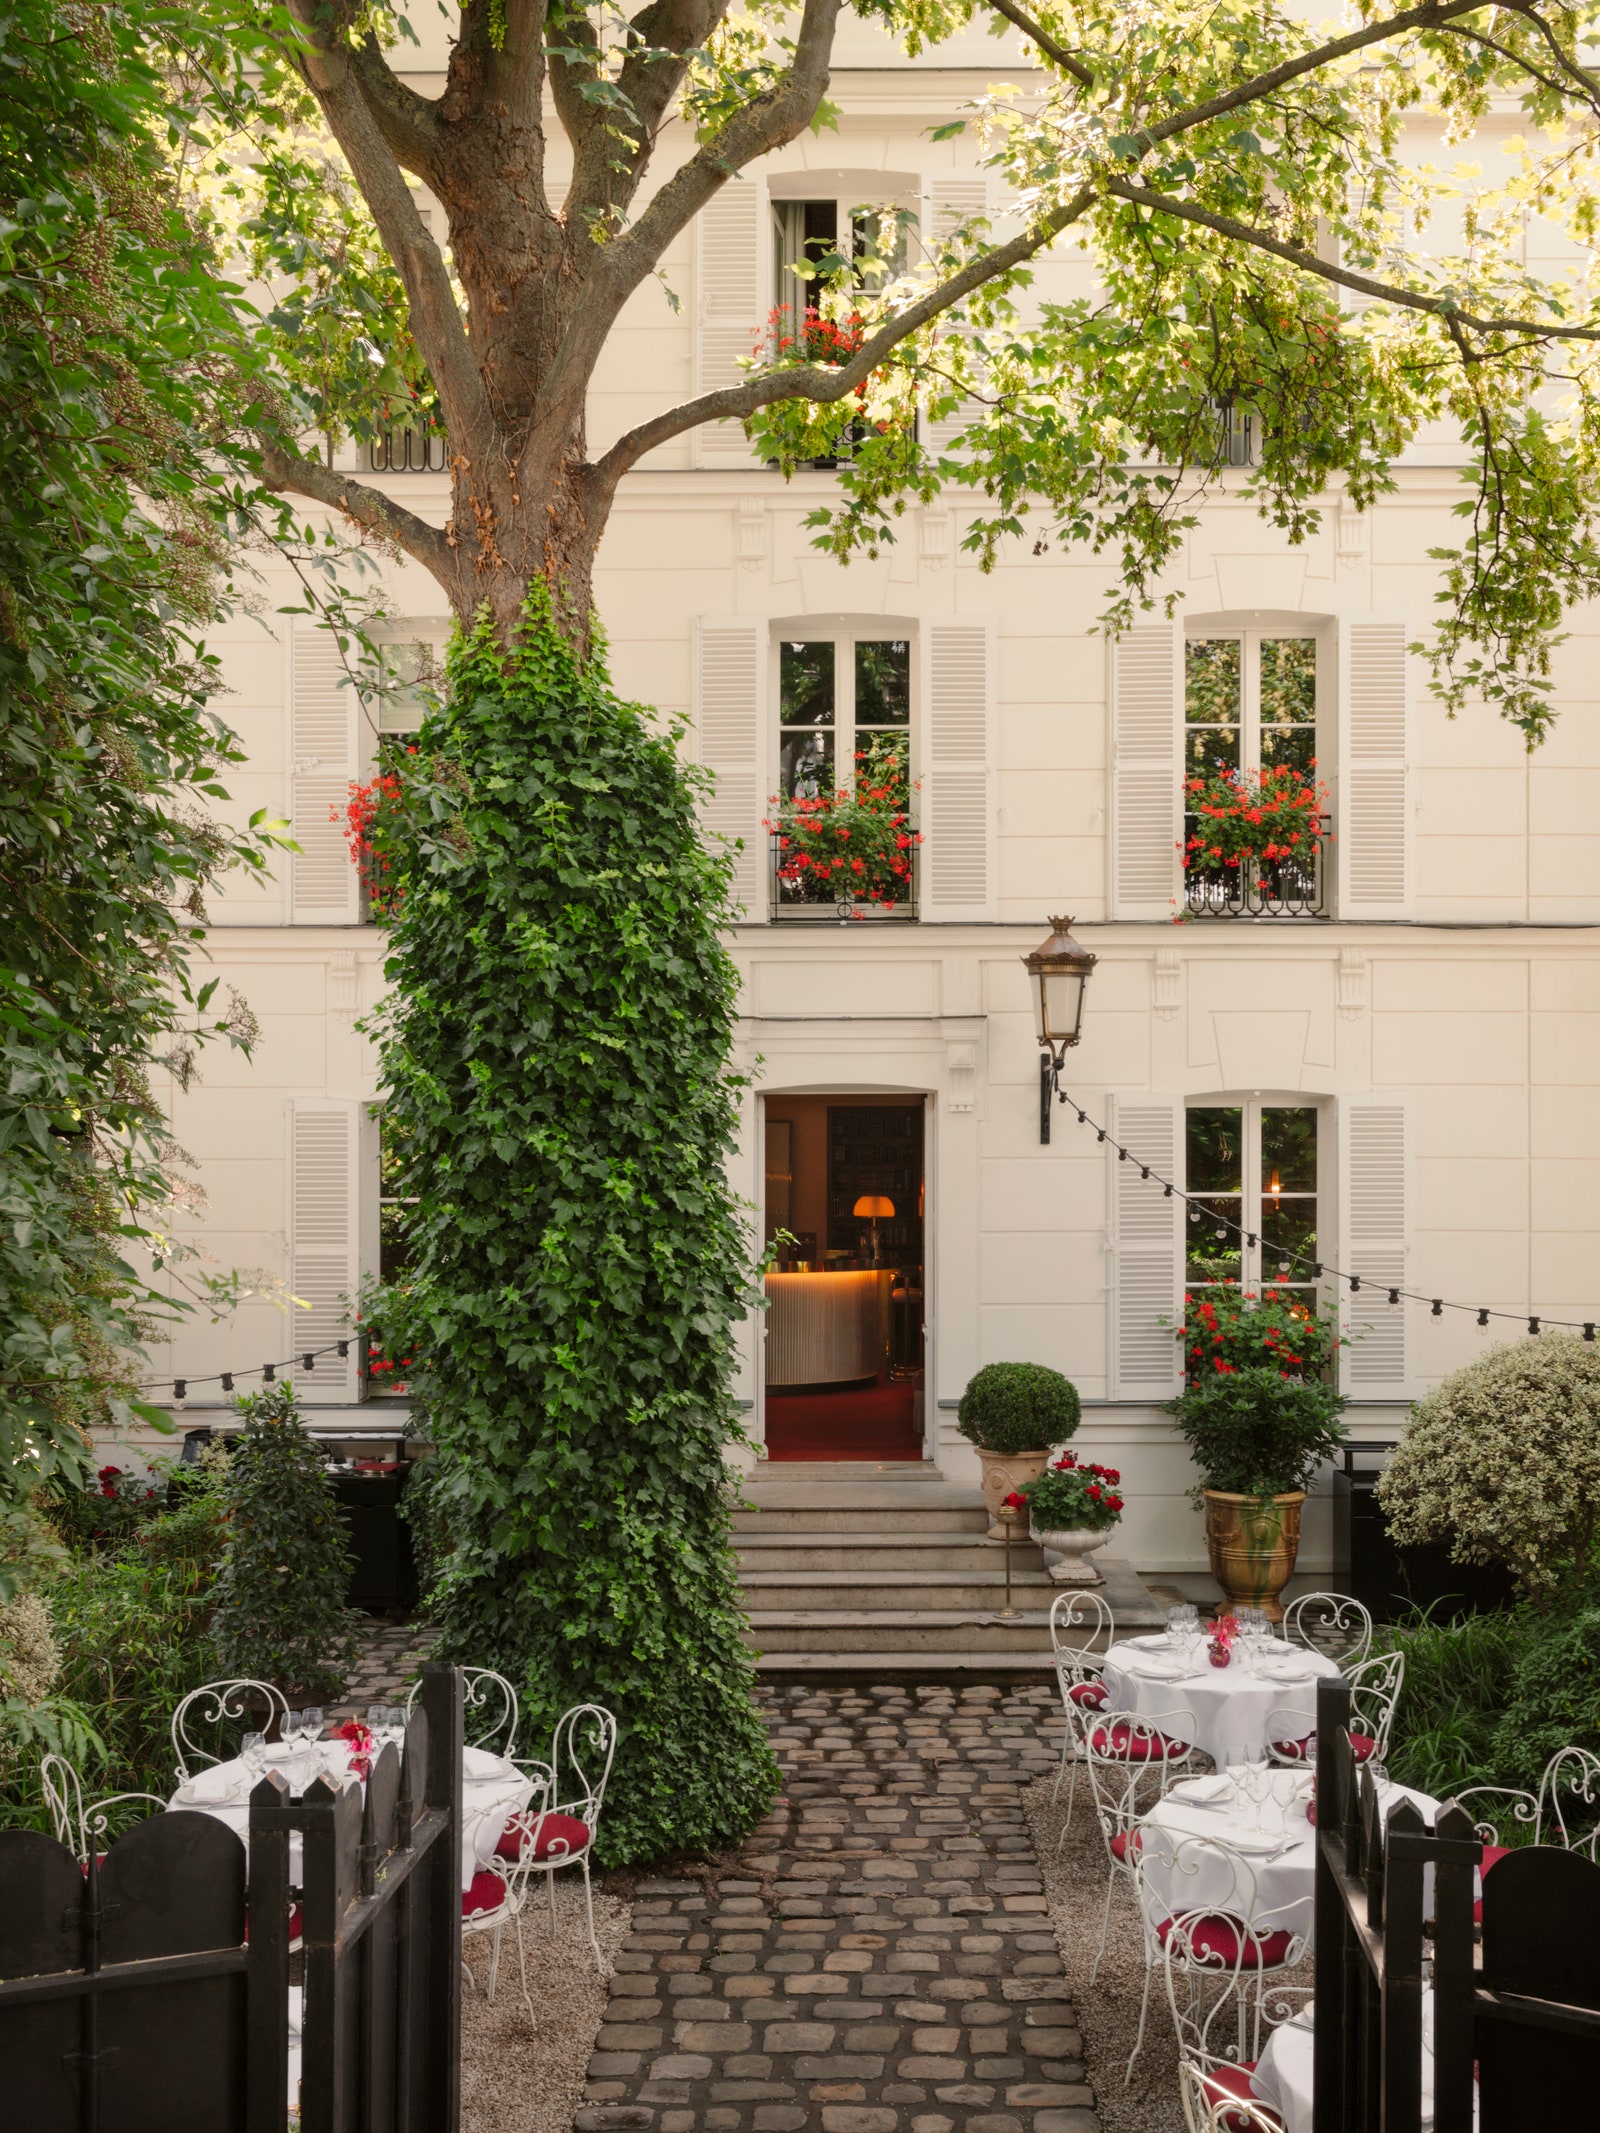 The hidden courtyard garden entrance of Hôtel Particulier Montmartre with crisp white linens + French iron garden chairs in front of a white 19th townhouse with red geraniums filling the shuttered balconies